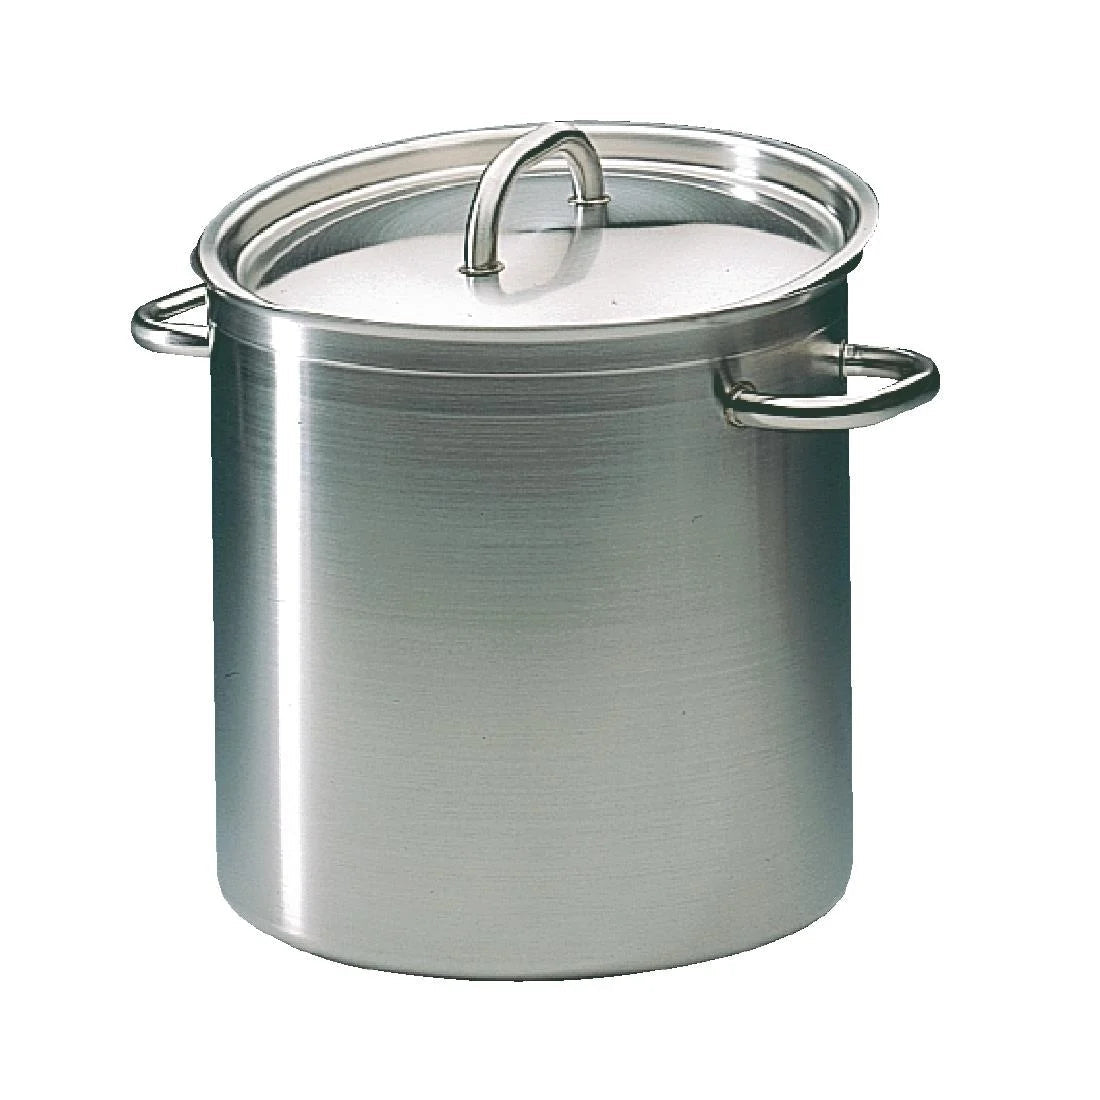 Bourgeat Excellence Stock Pot 25Ltr JD Catering Equipment Solutions Ltd